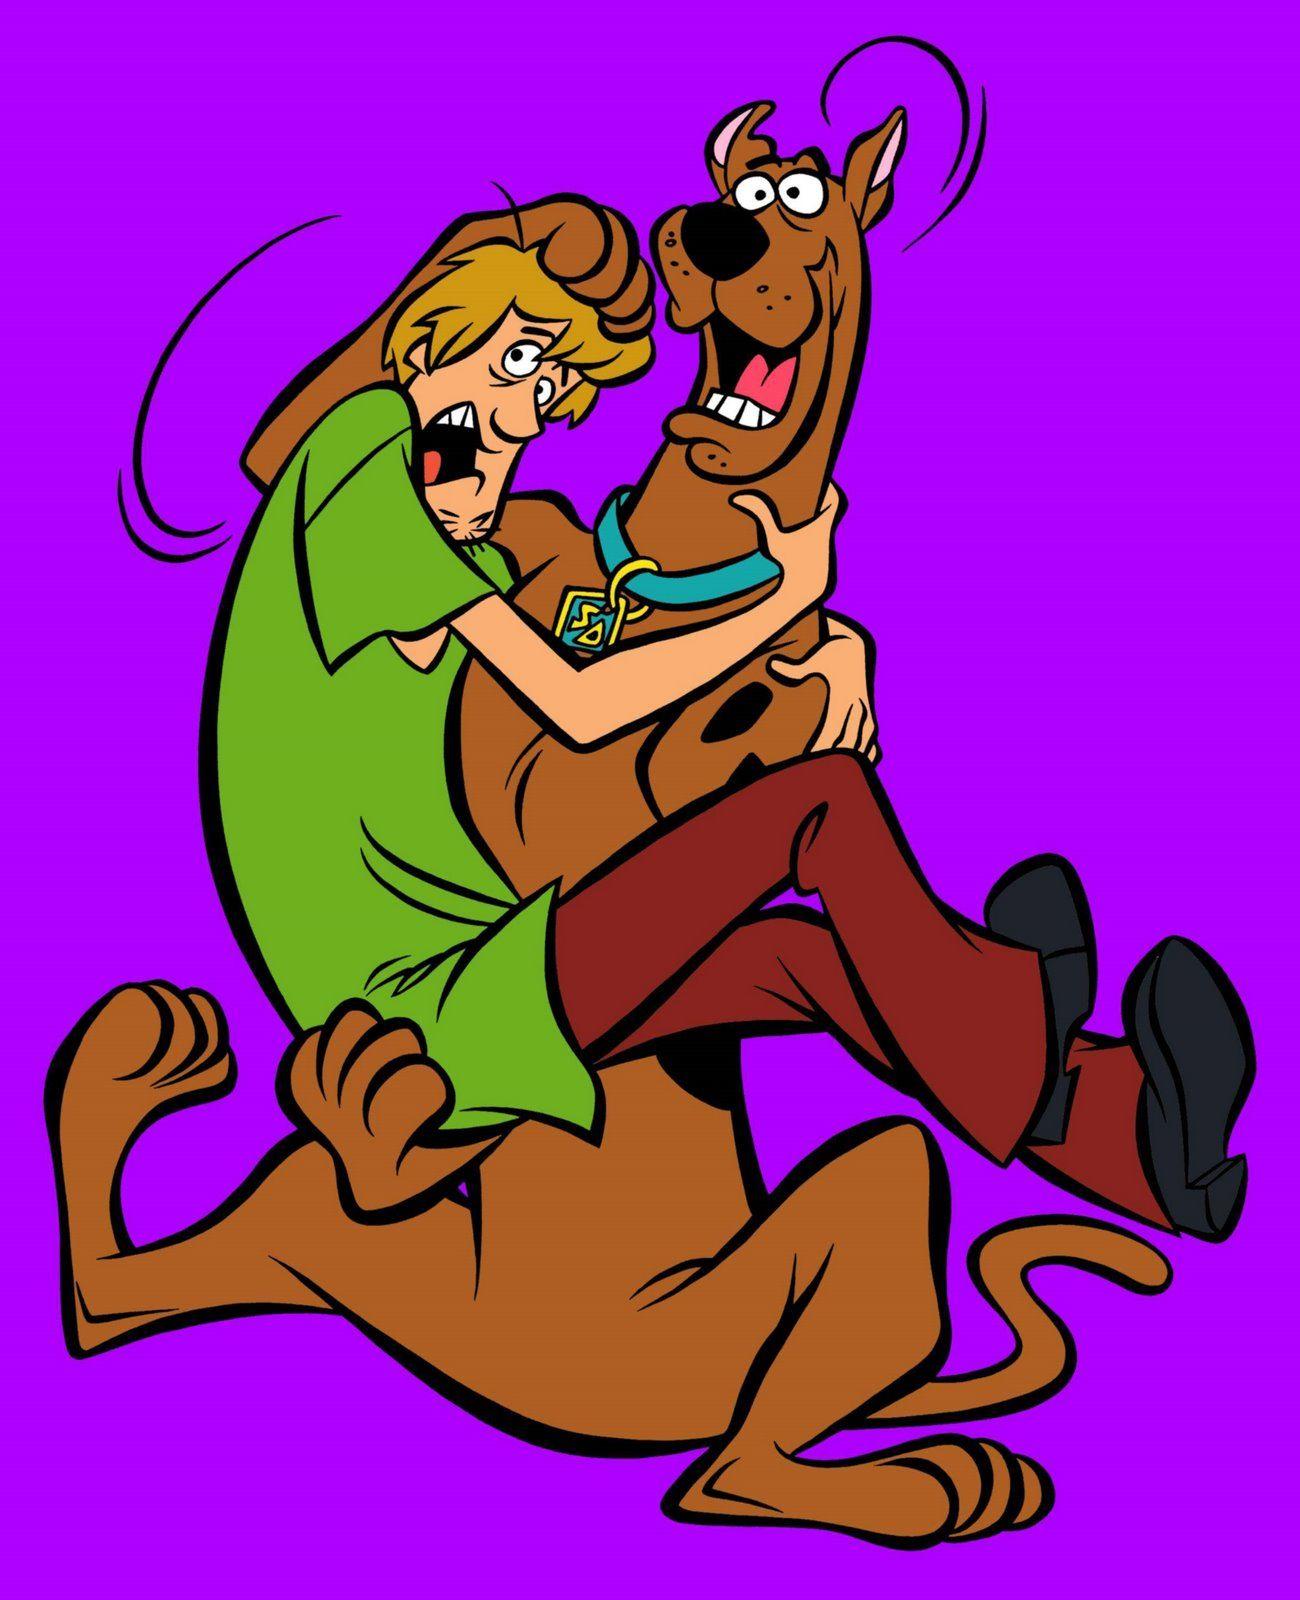 Shaggy Rogers and Scooby Doo  Disney wallpaper Cartoon character  pictures Shaggy and scooby